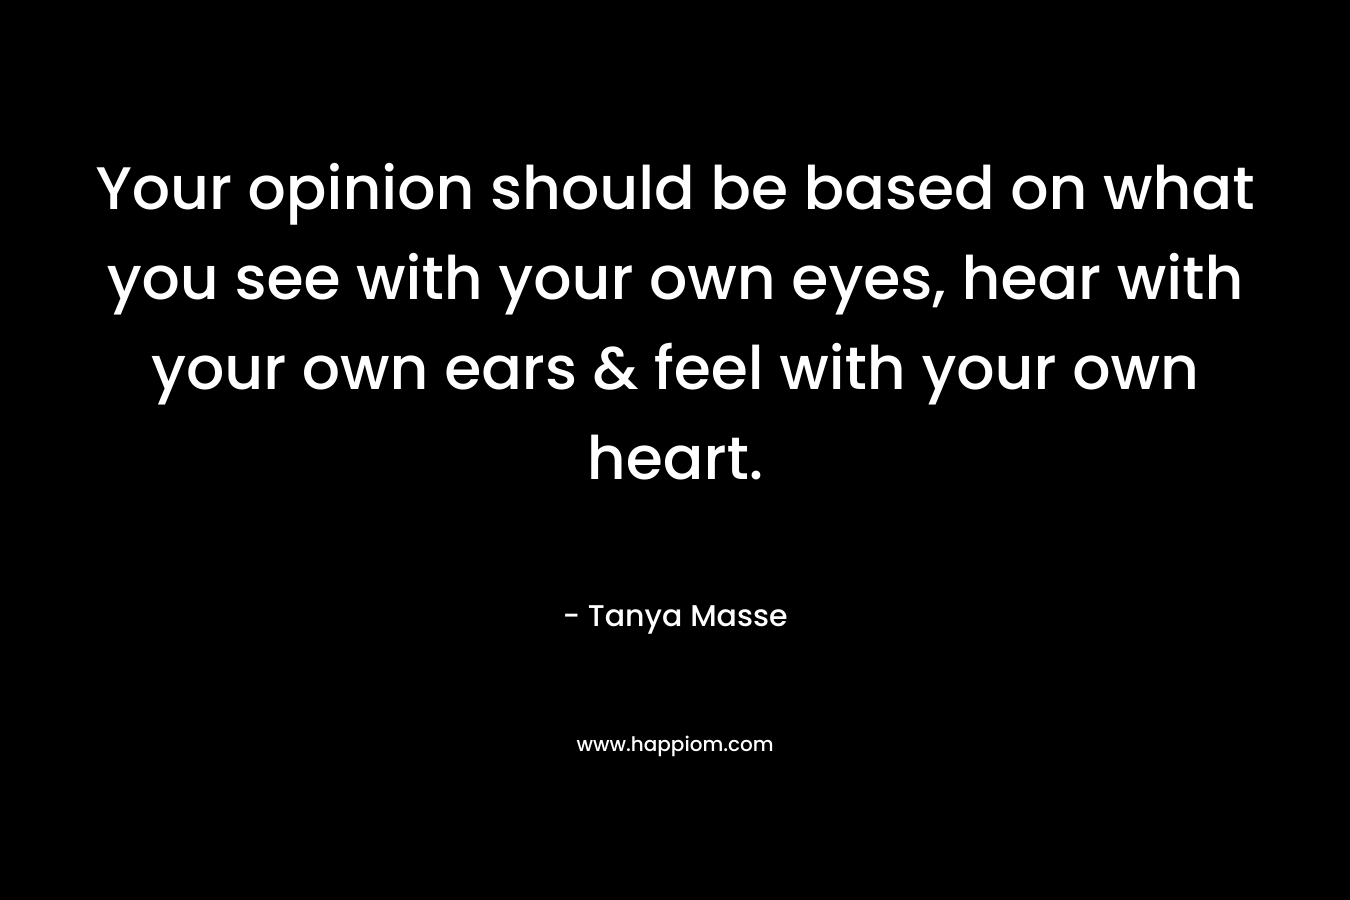 Your opinion should be based on what you see with your own eyes, hear with your own ears & feel with your own heart.